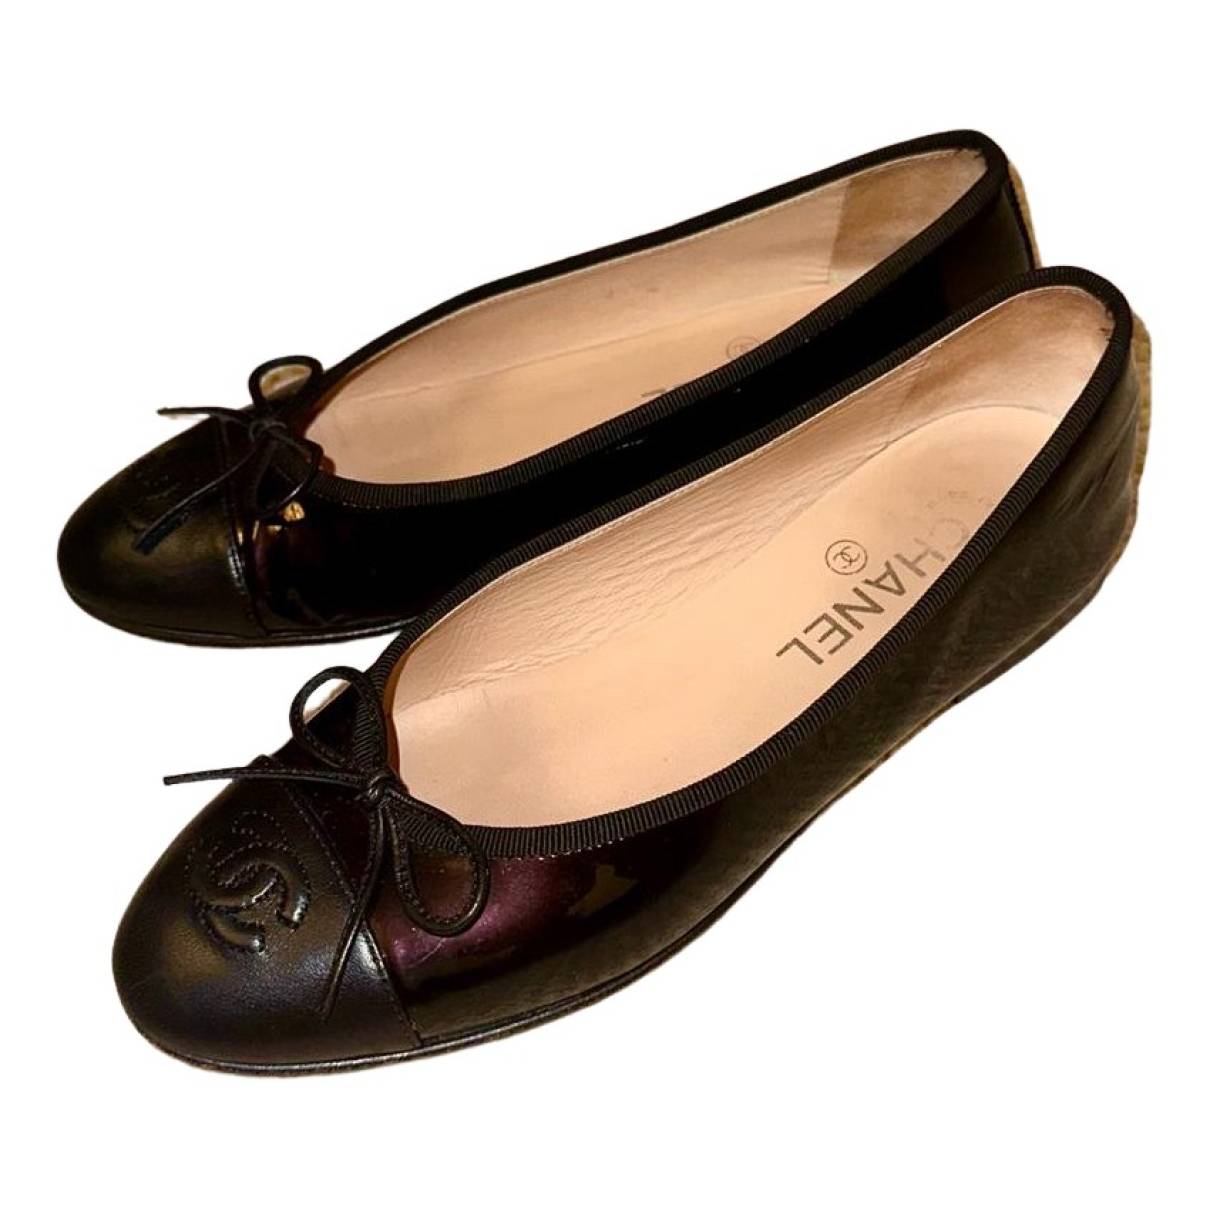 Chanel - Authenticated Ballet Flats - Patent Leather Brown Plain for Women, Very Good Condition